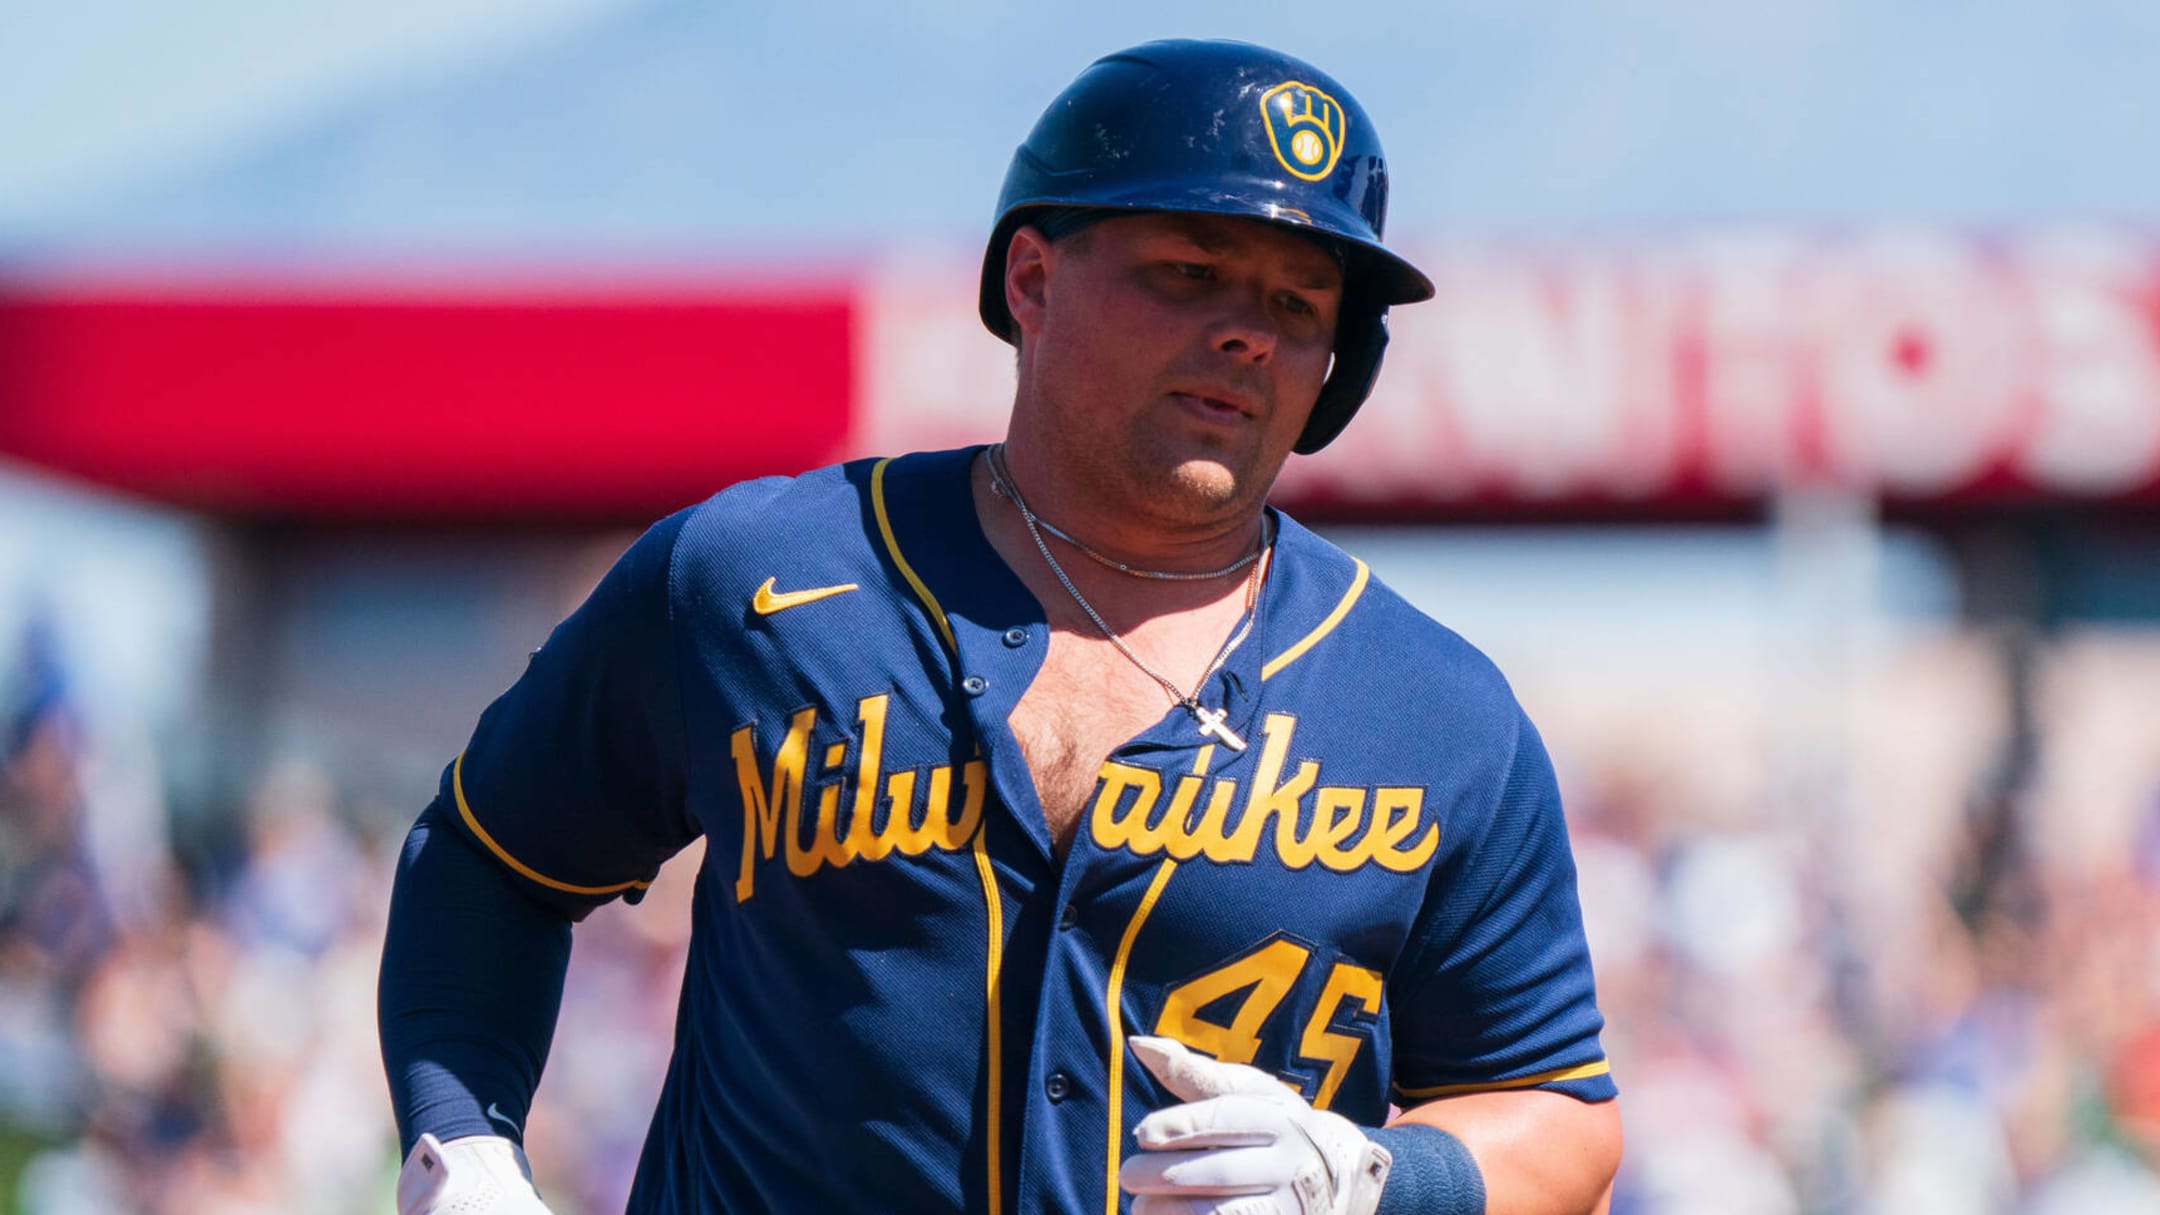 Luke Voit hopes to remain with the Brewers ahead of opt-out deadline